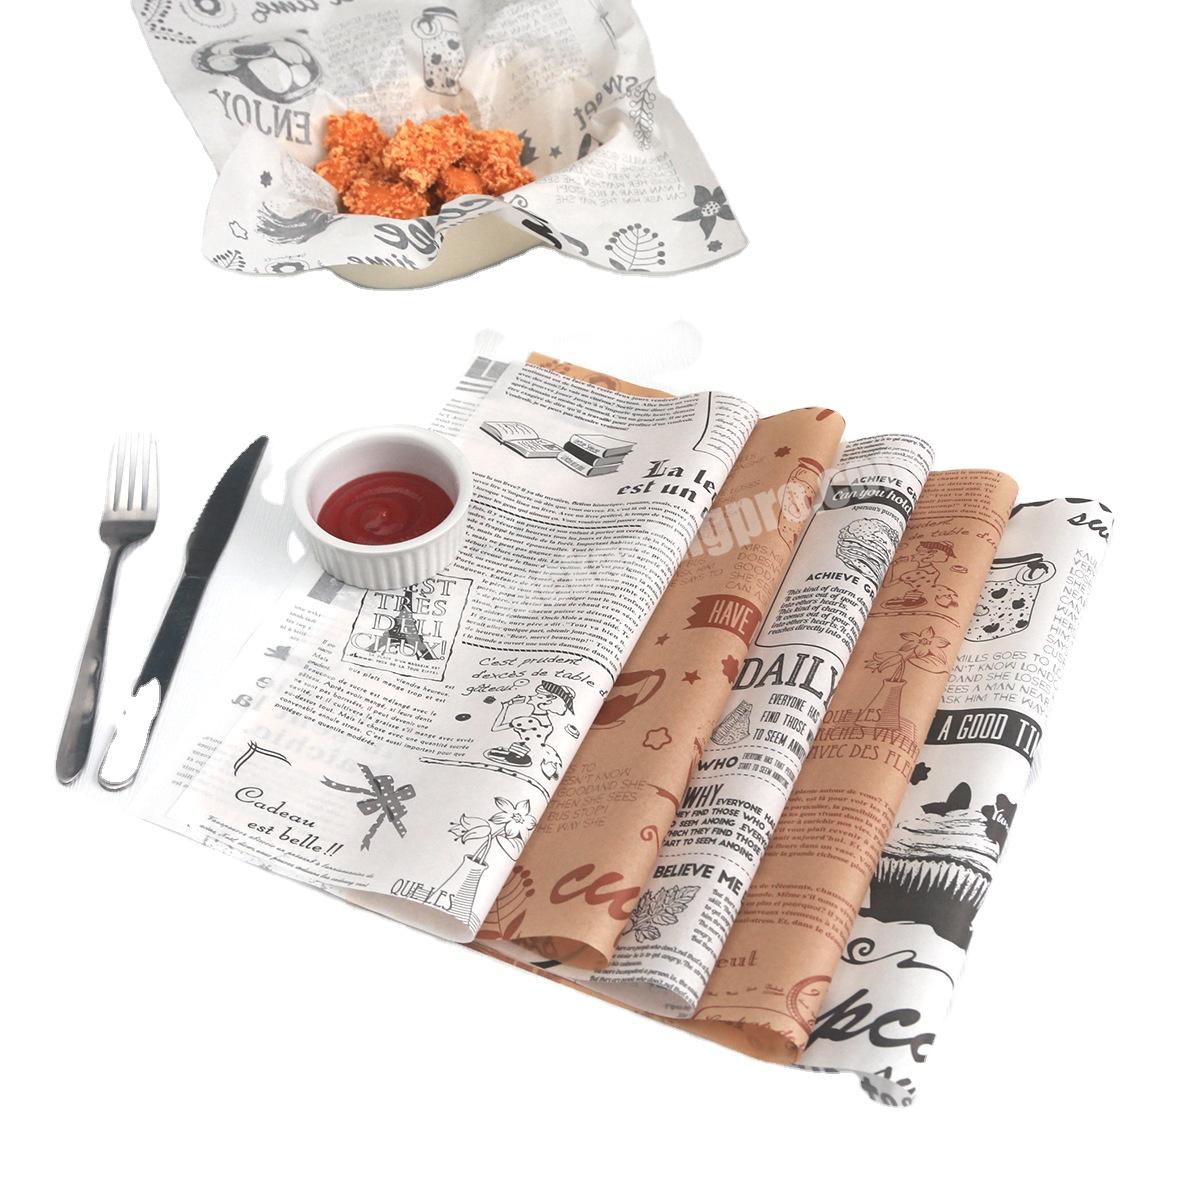 https://thepackagingpro.com/media/images/product/2023/5/Custom-Patterned-Wax-Wrapping-Paper-For-Food-Greaseproof-Hamburger-Sandwich-Meat-Wrapping-Paper.jpg